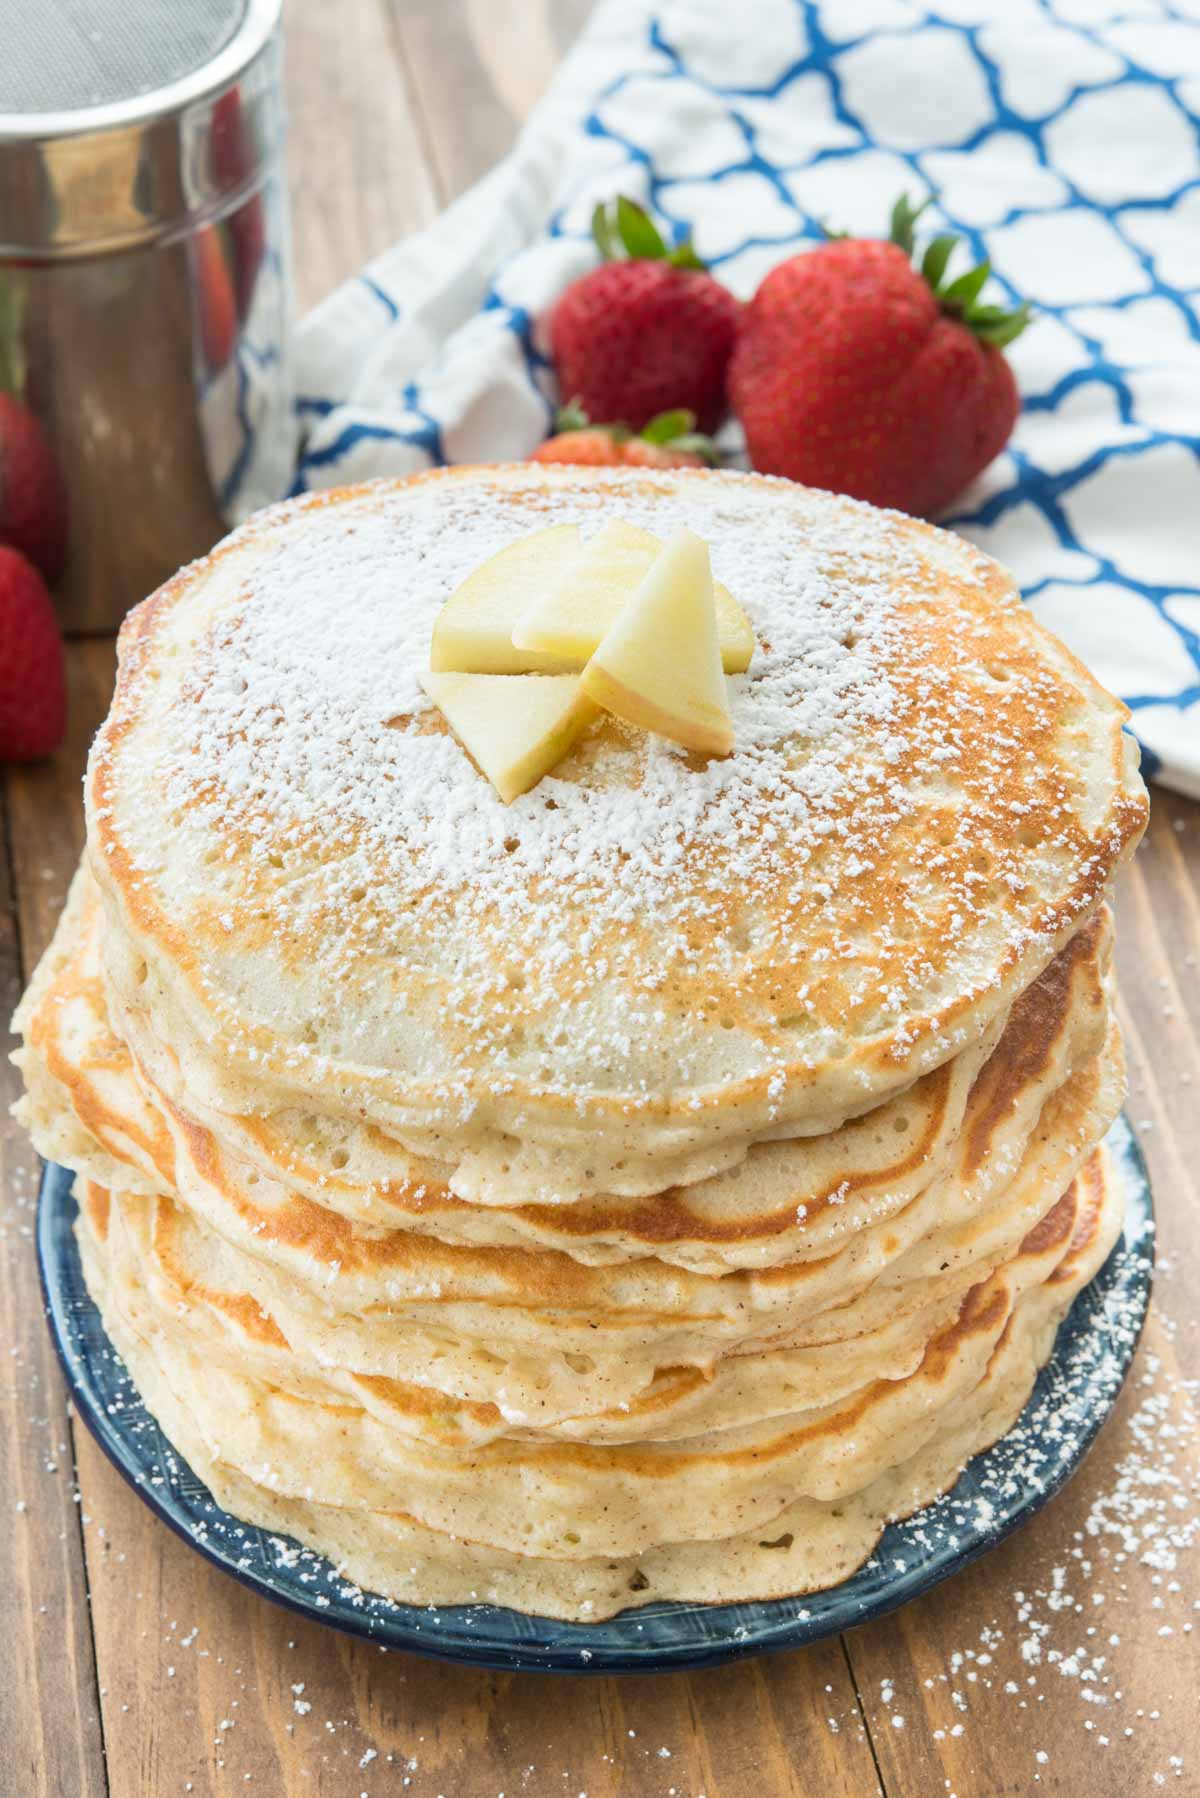 stacked pancakes with apple slices on top.